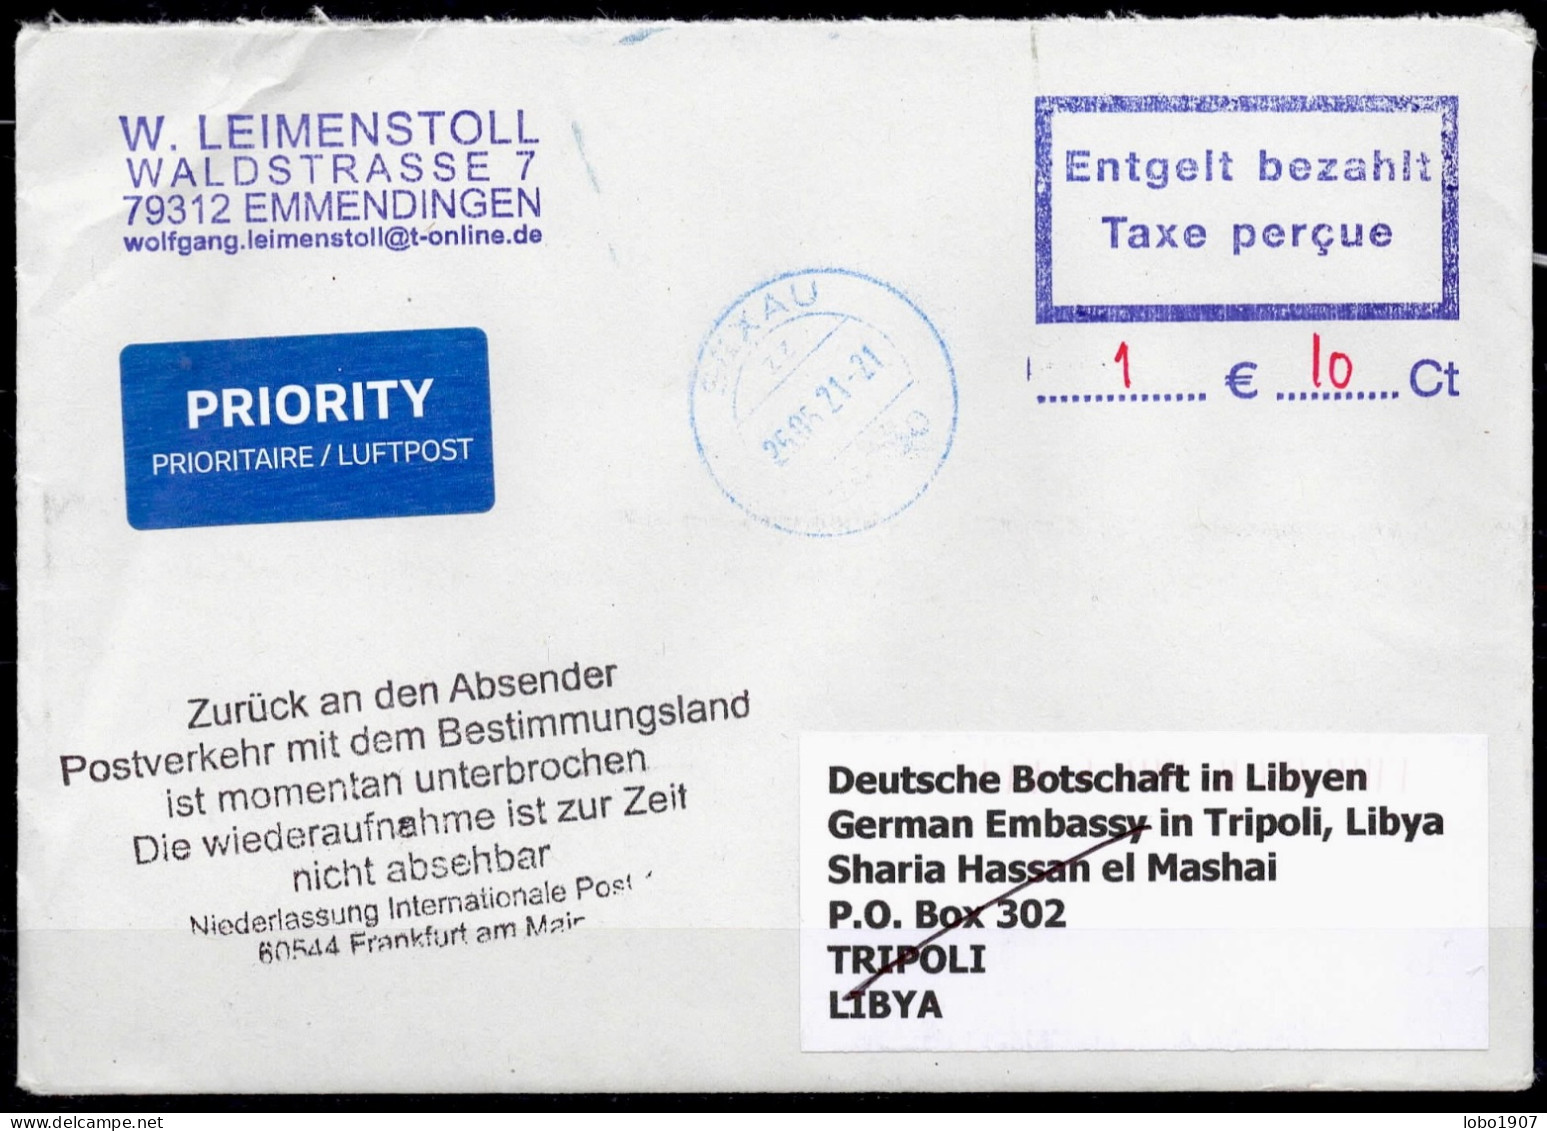 Corona Covid 19 Postal Service Interruption "Zurück An Den Absender... " ( 74x29mm )  Reply Coupon Paid Cover To LYBIA - Libyen